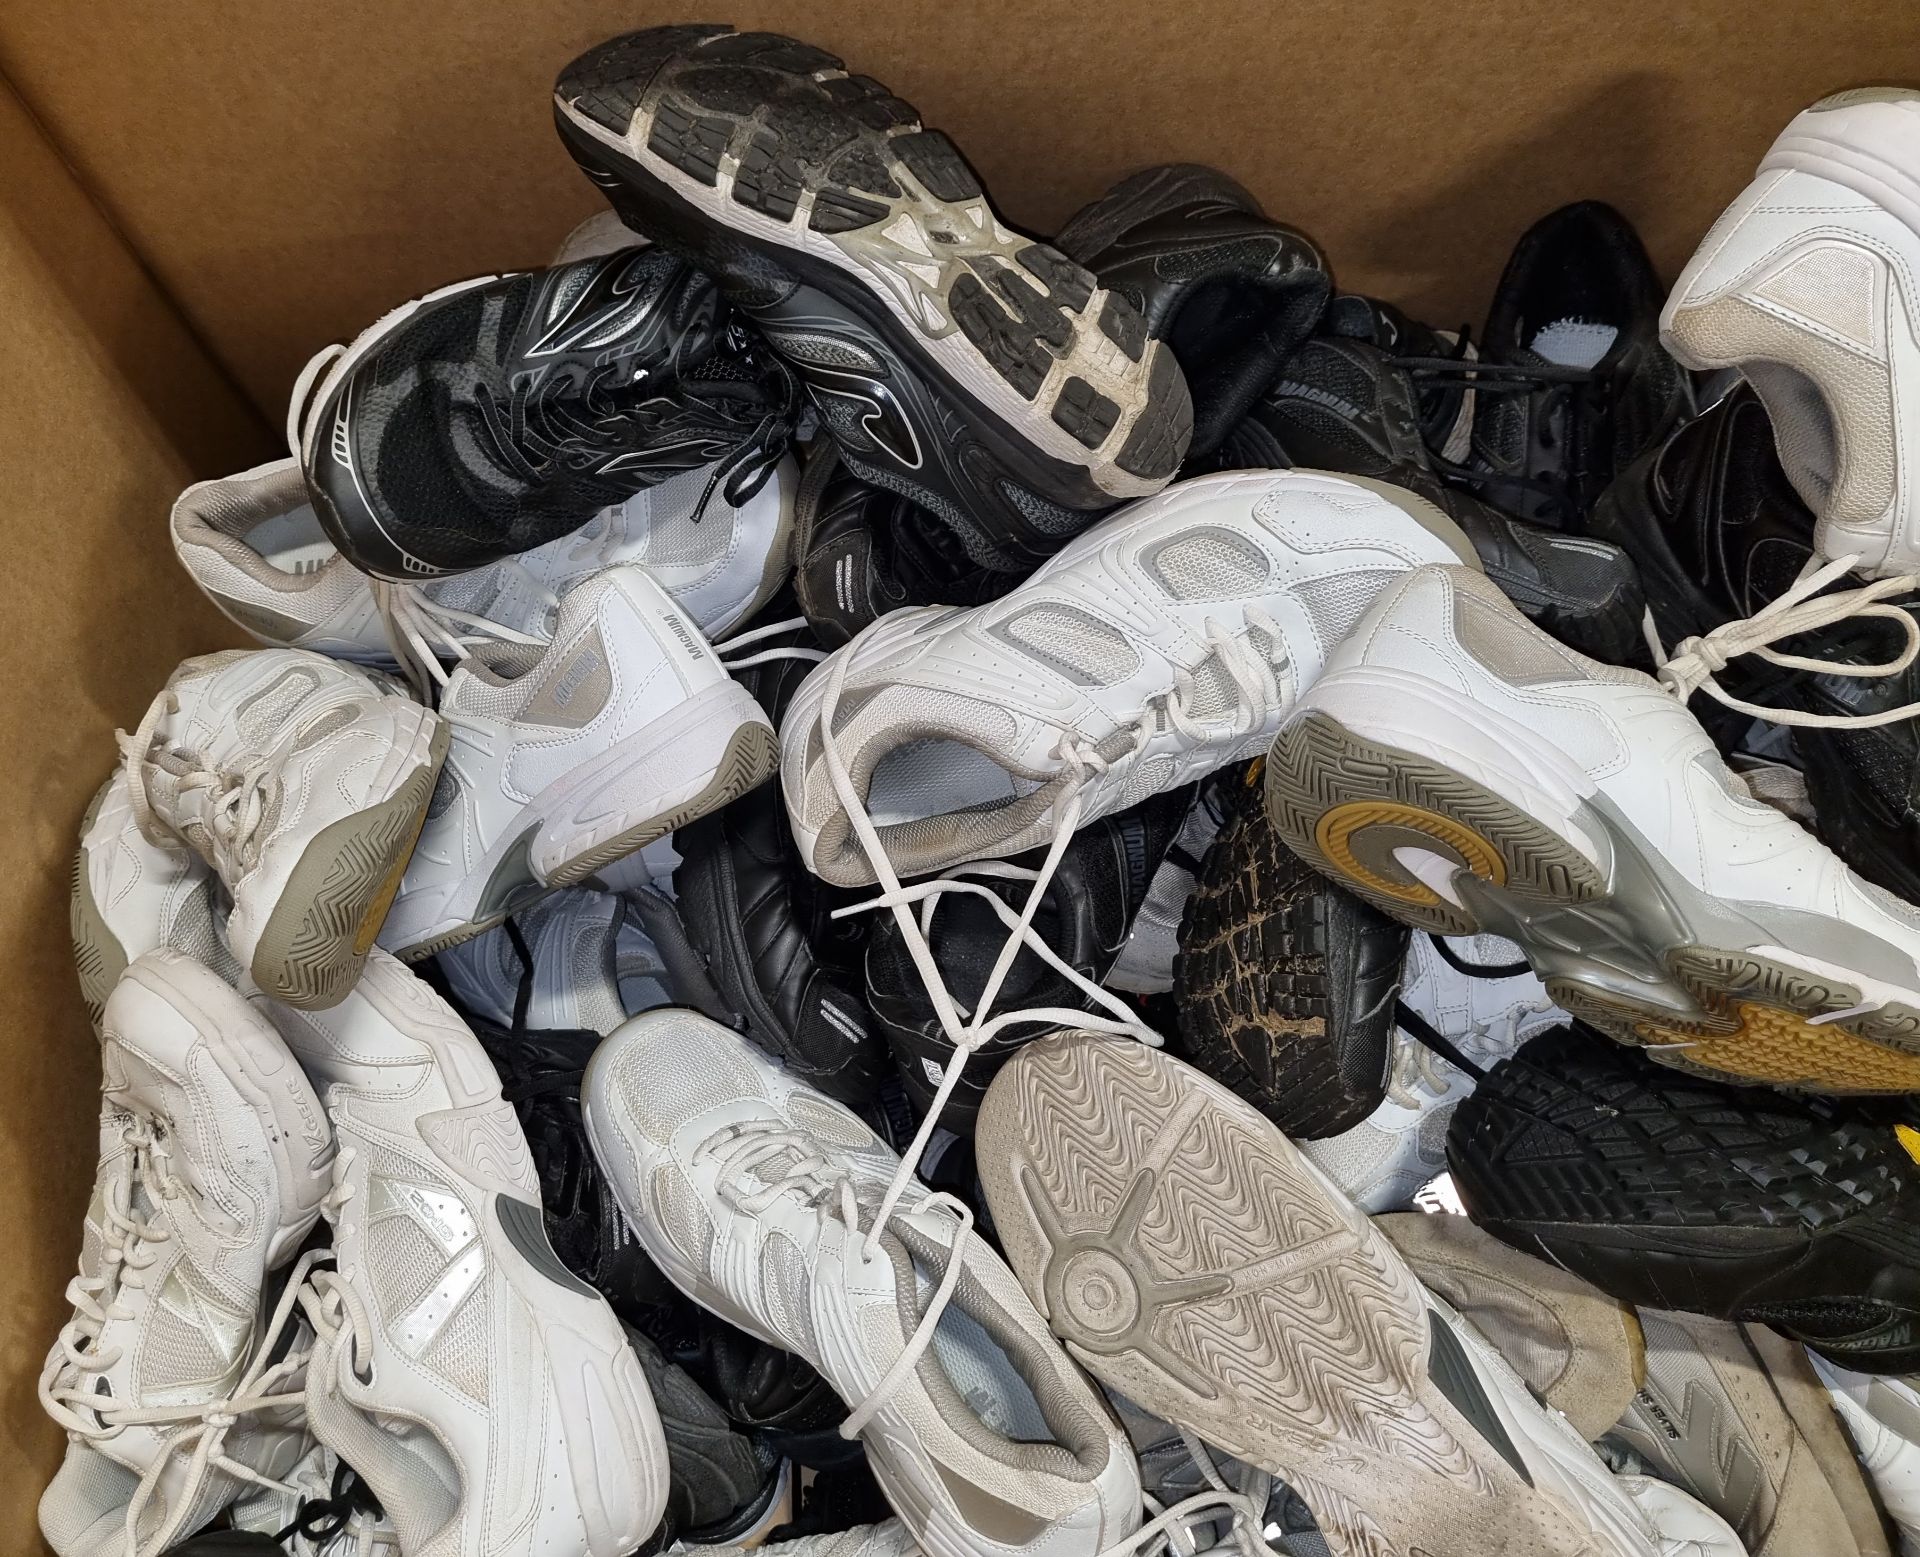 50x pairs of various trainers - different makes & sizes - mixed grades - Image 2 of 5